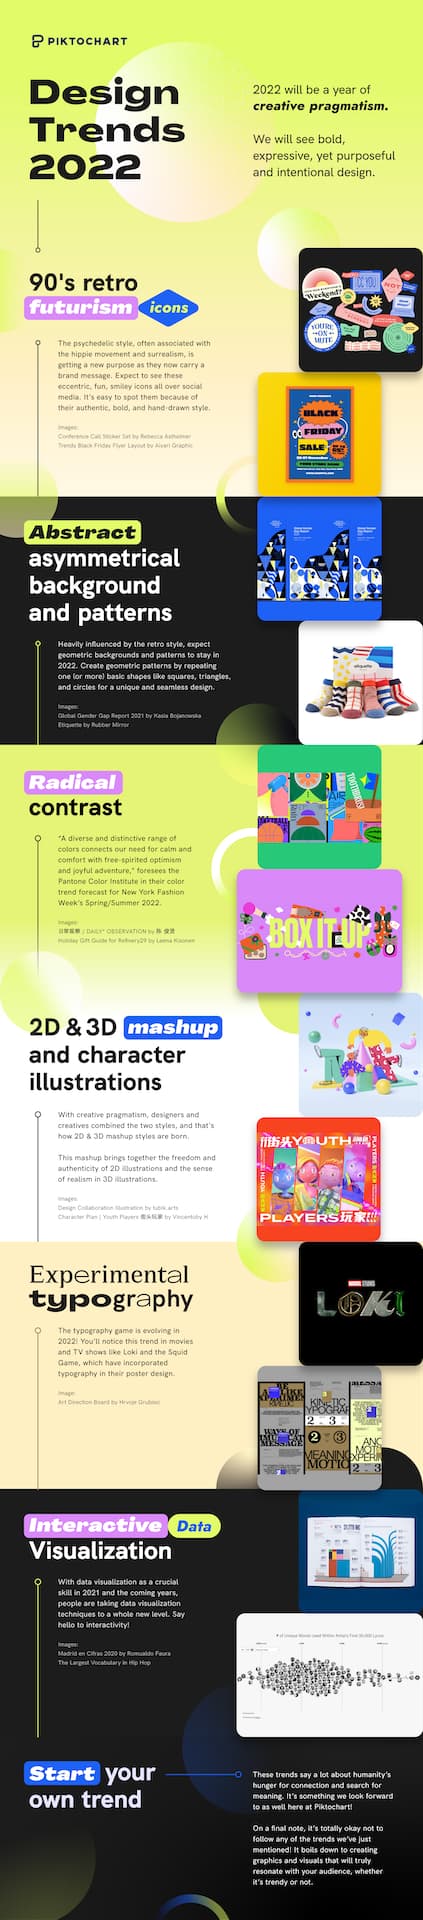 an infographic about graphic design trends